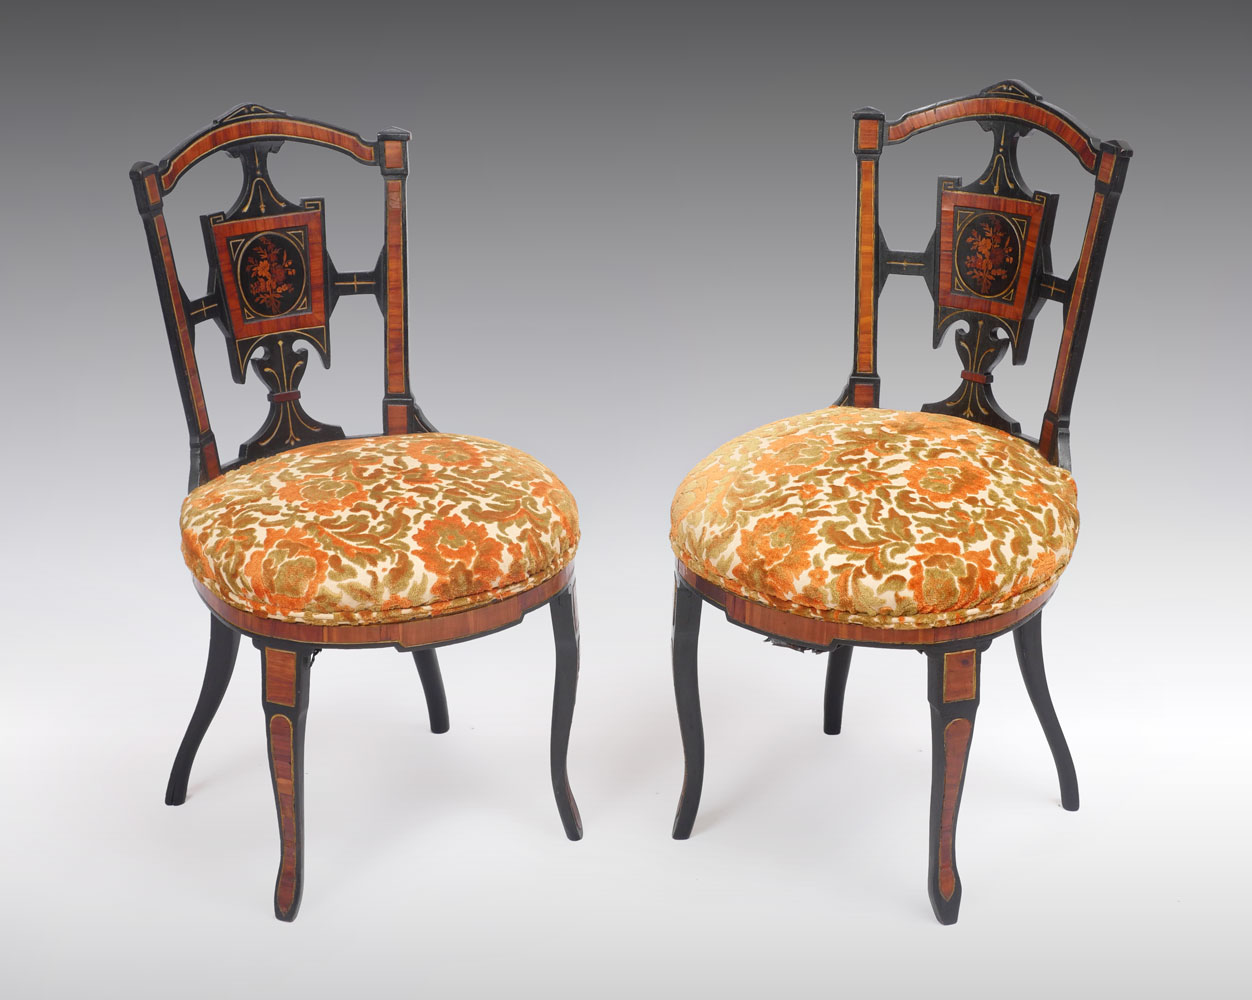 PAIR OF VICTORIAN INLAID CHAIRS: